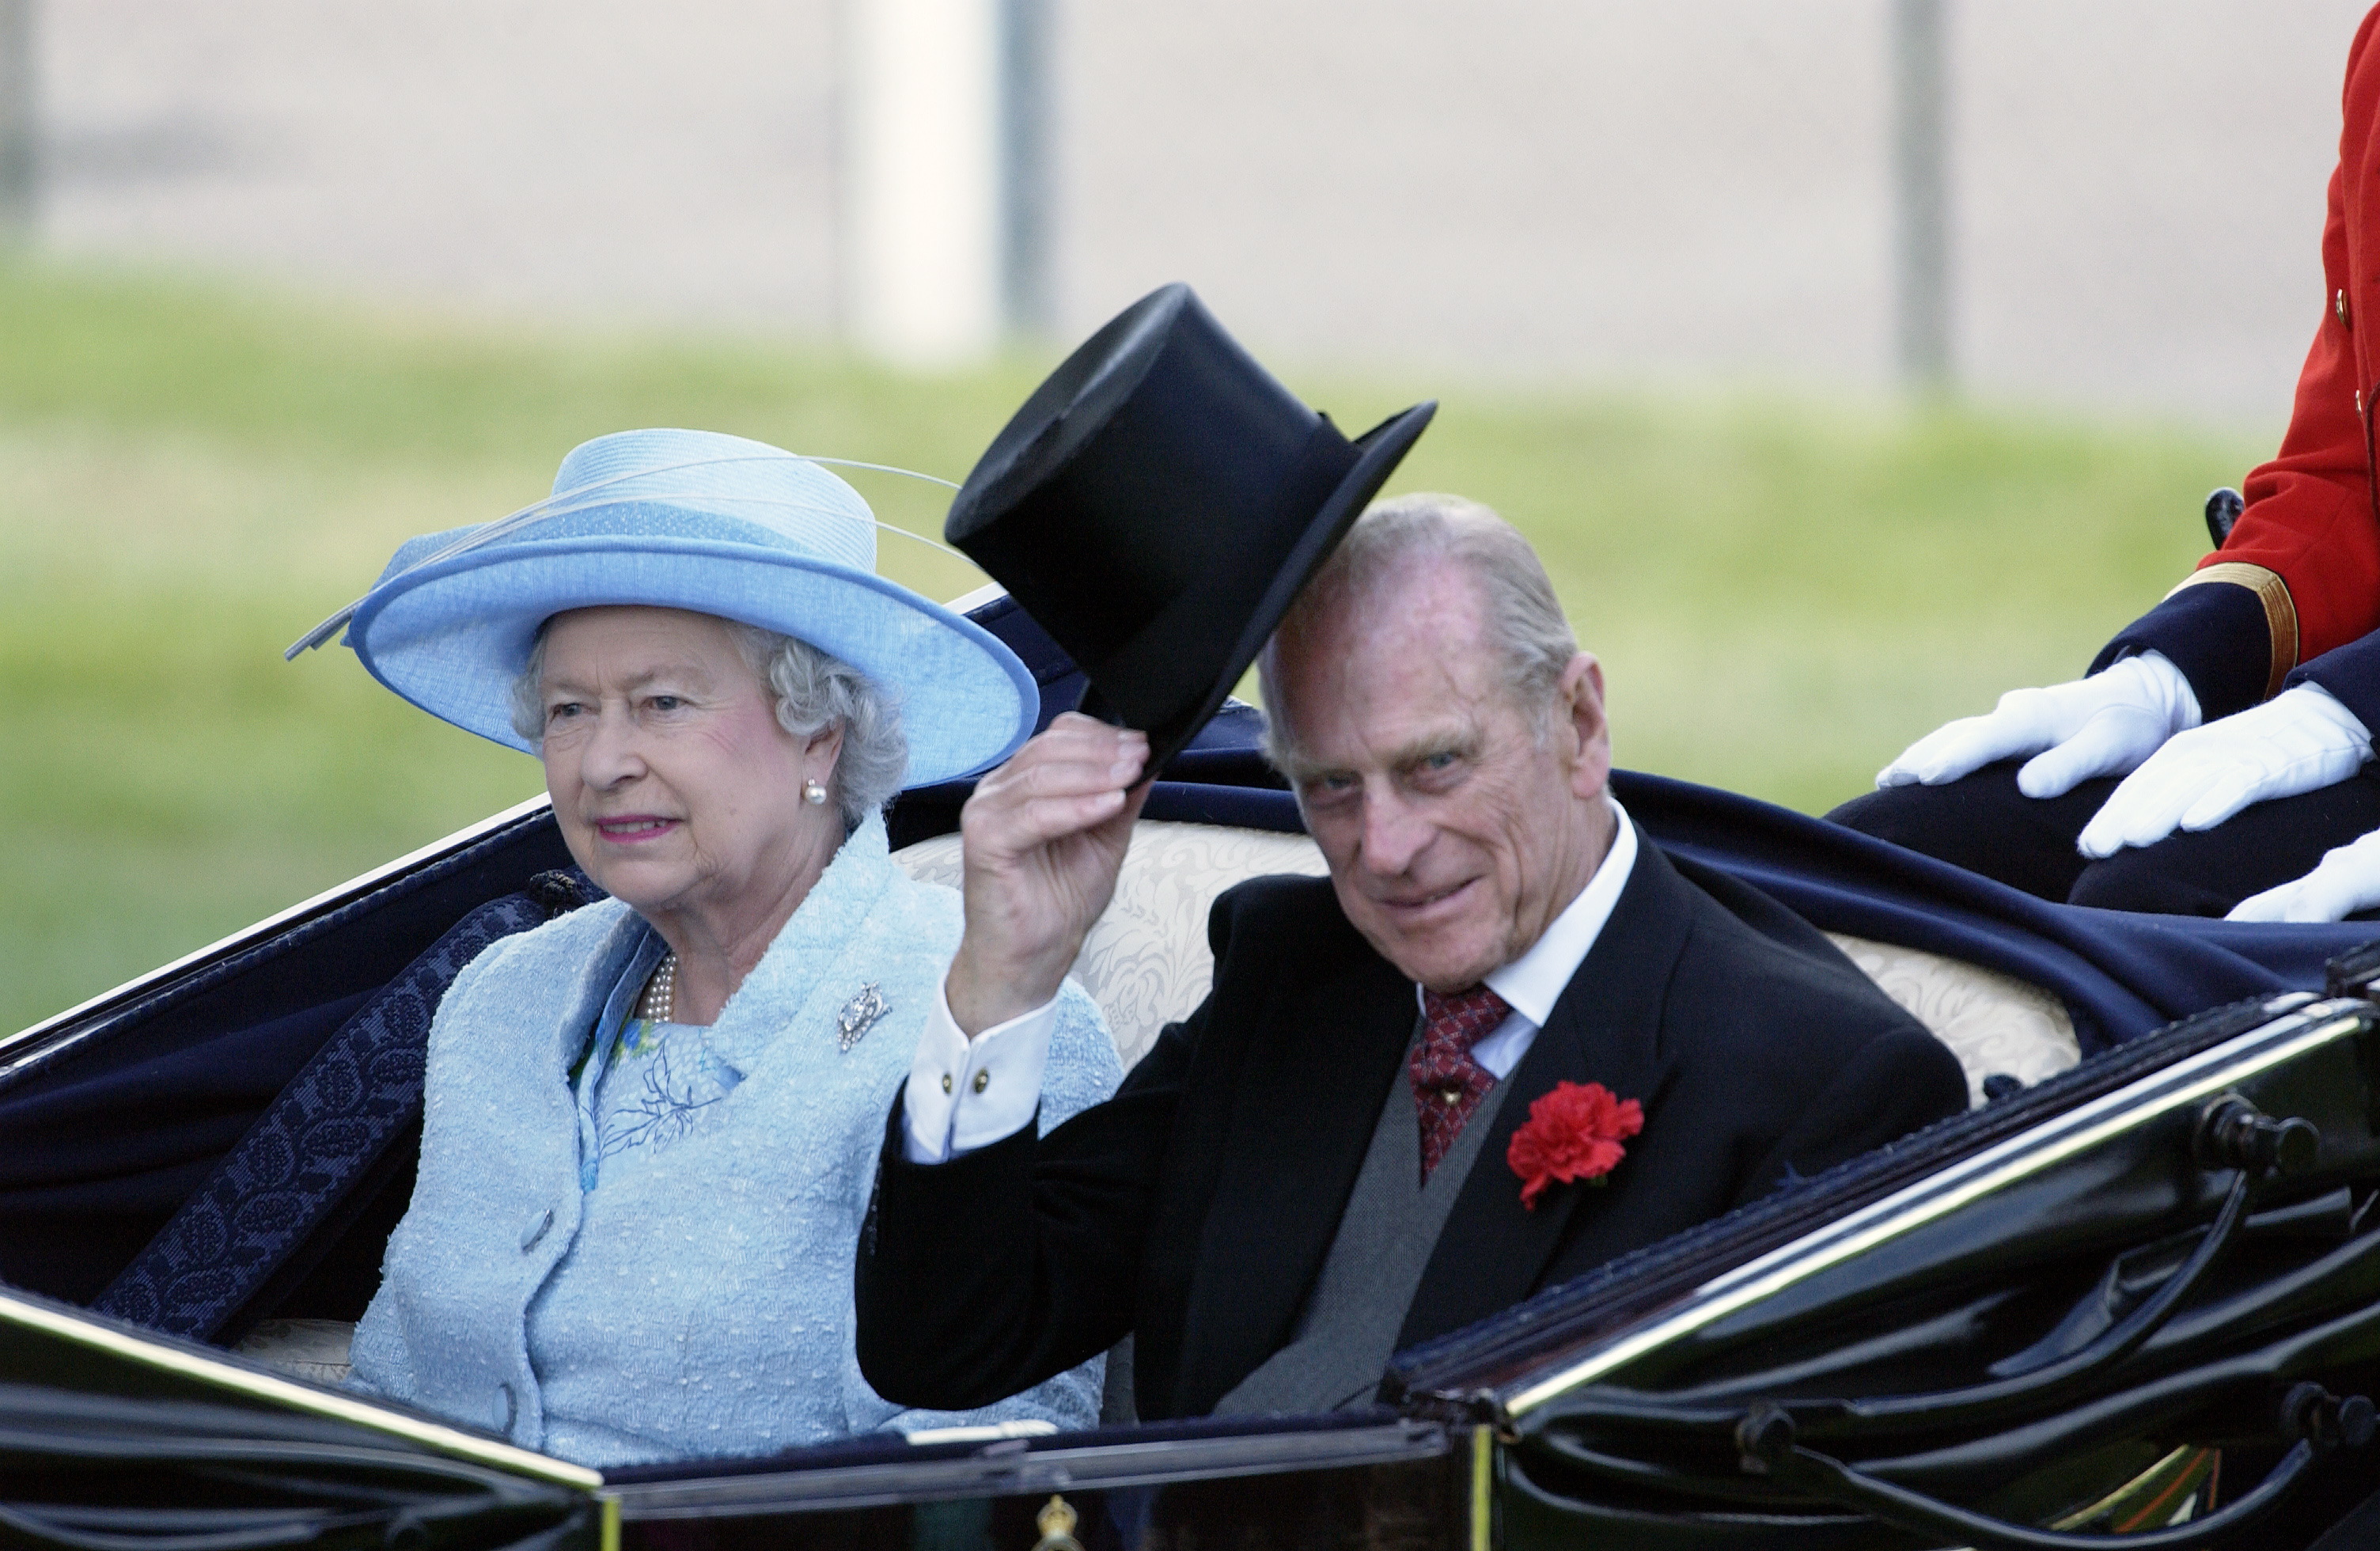 Queen Elizabeth and Prince Philip at the Royal Ascot Races on June 16, 2004. (Tim Graham—Getty Images)